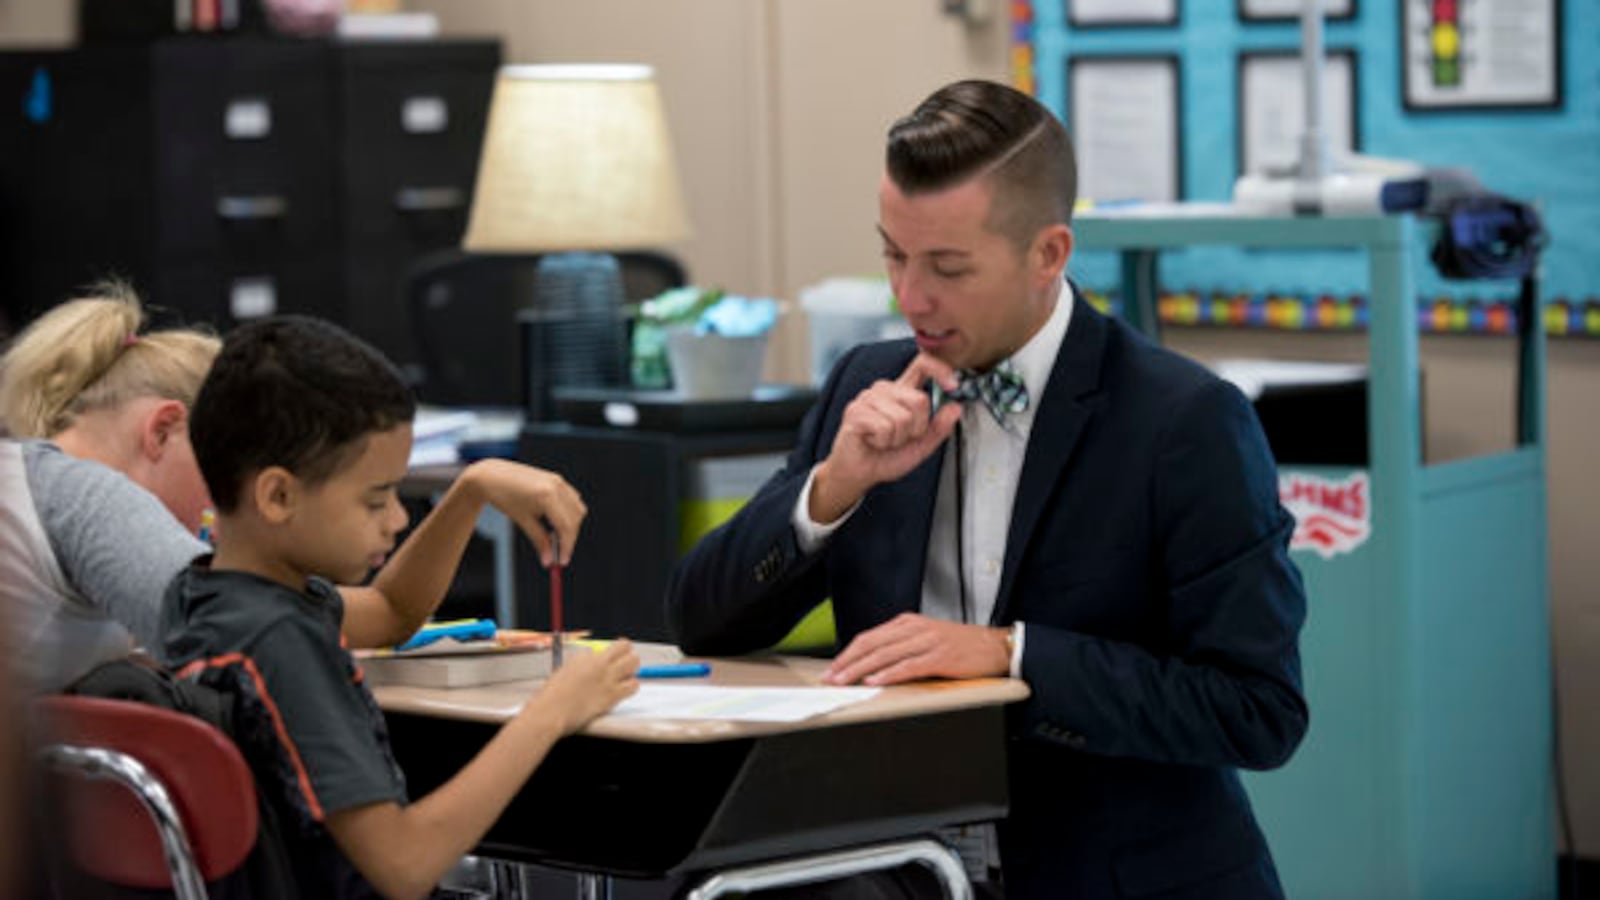 Derek Voiles, Tennessee's 2016-17 Teacher of the Year was featured in a podcast series sharing his “education epiphany” — the personal moment that crystallized the importance of being a teacher. You can listen to Derek’s episode at TeacherPodcasts.org.